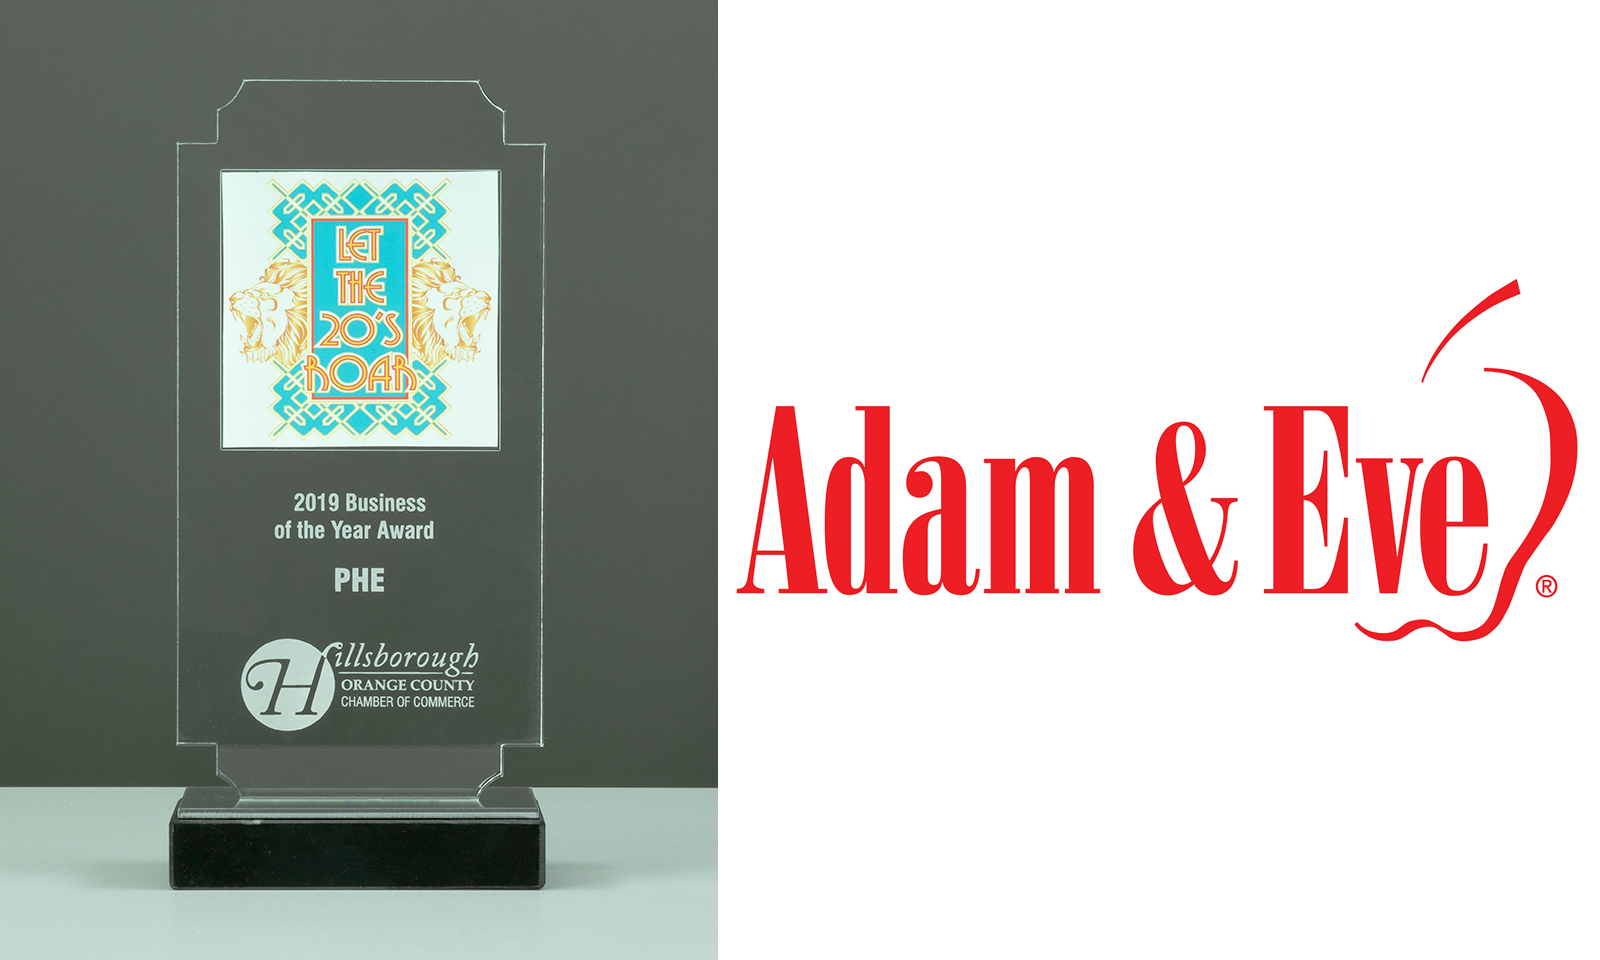 PHE/Adam & Eve Named Local Business of the Year